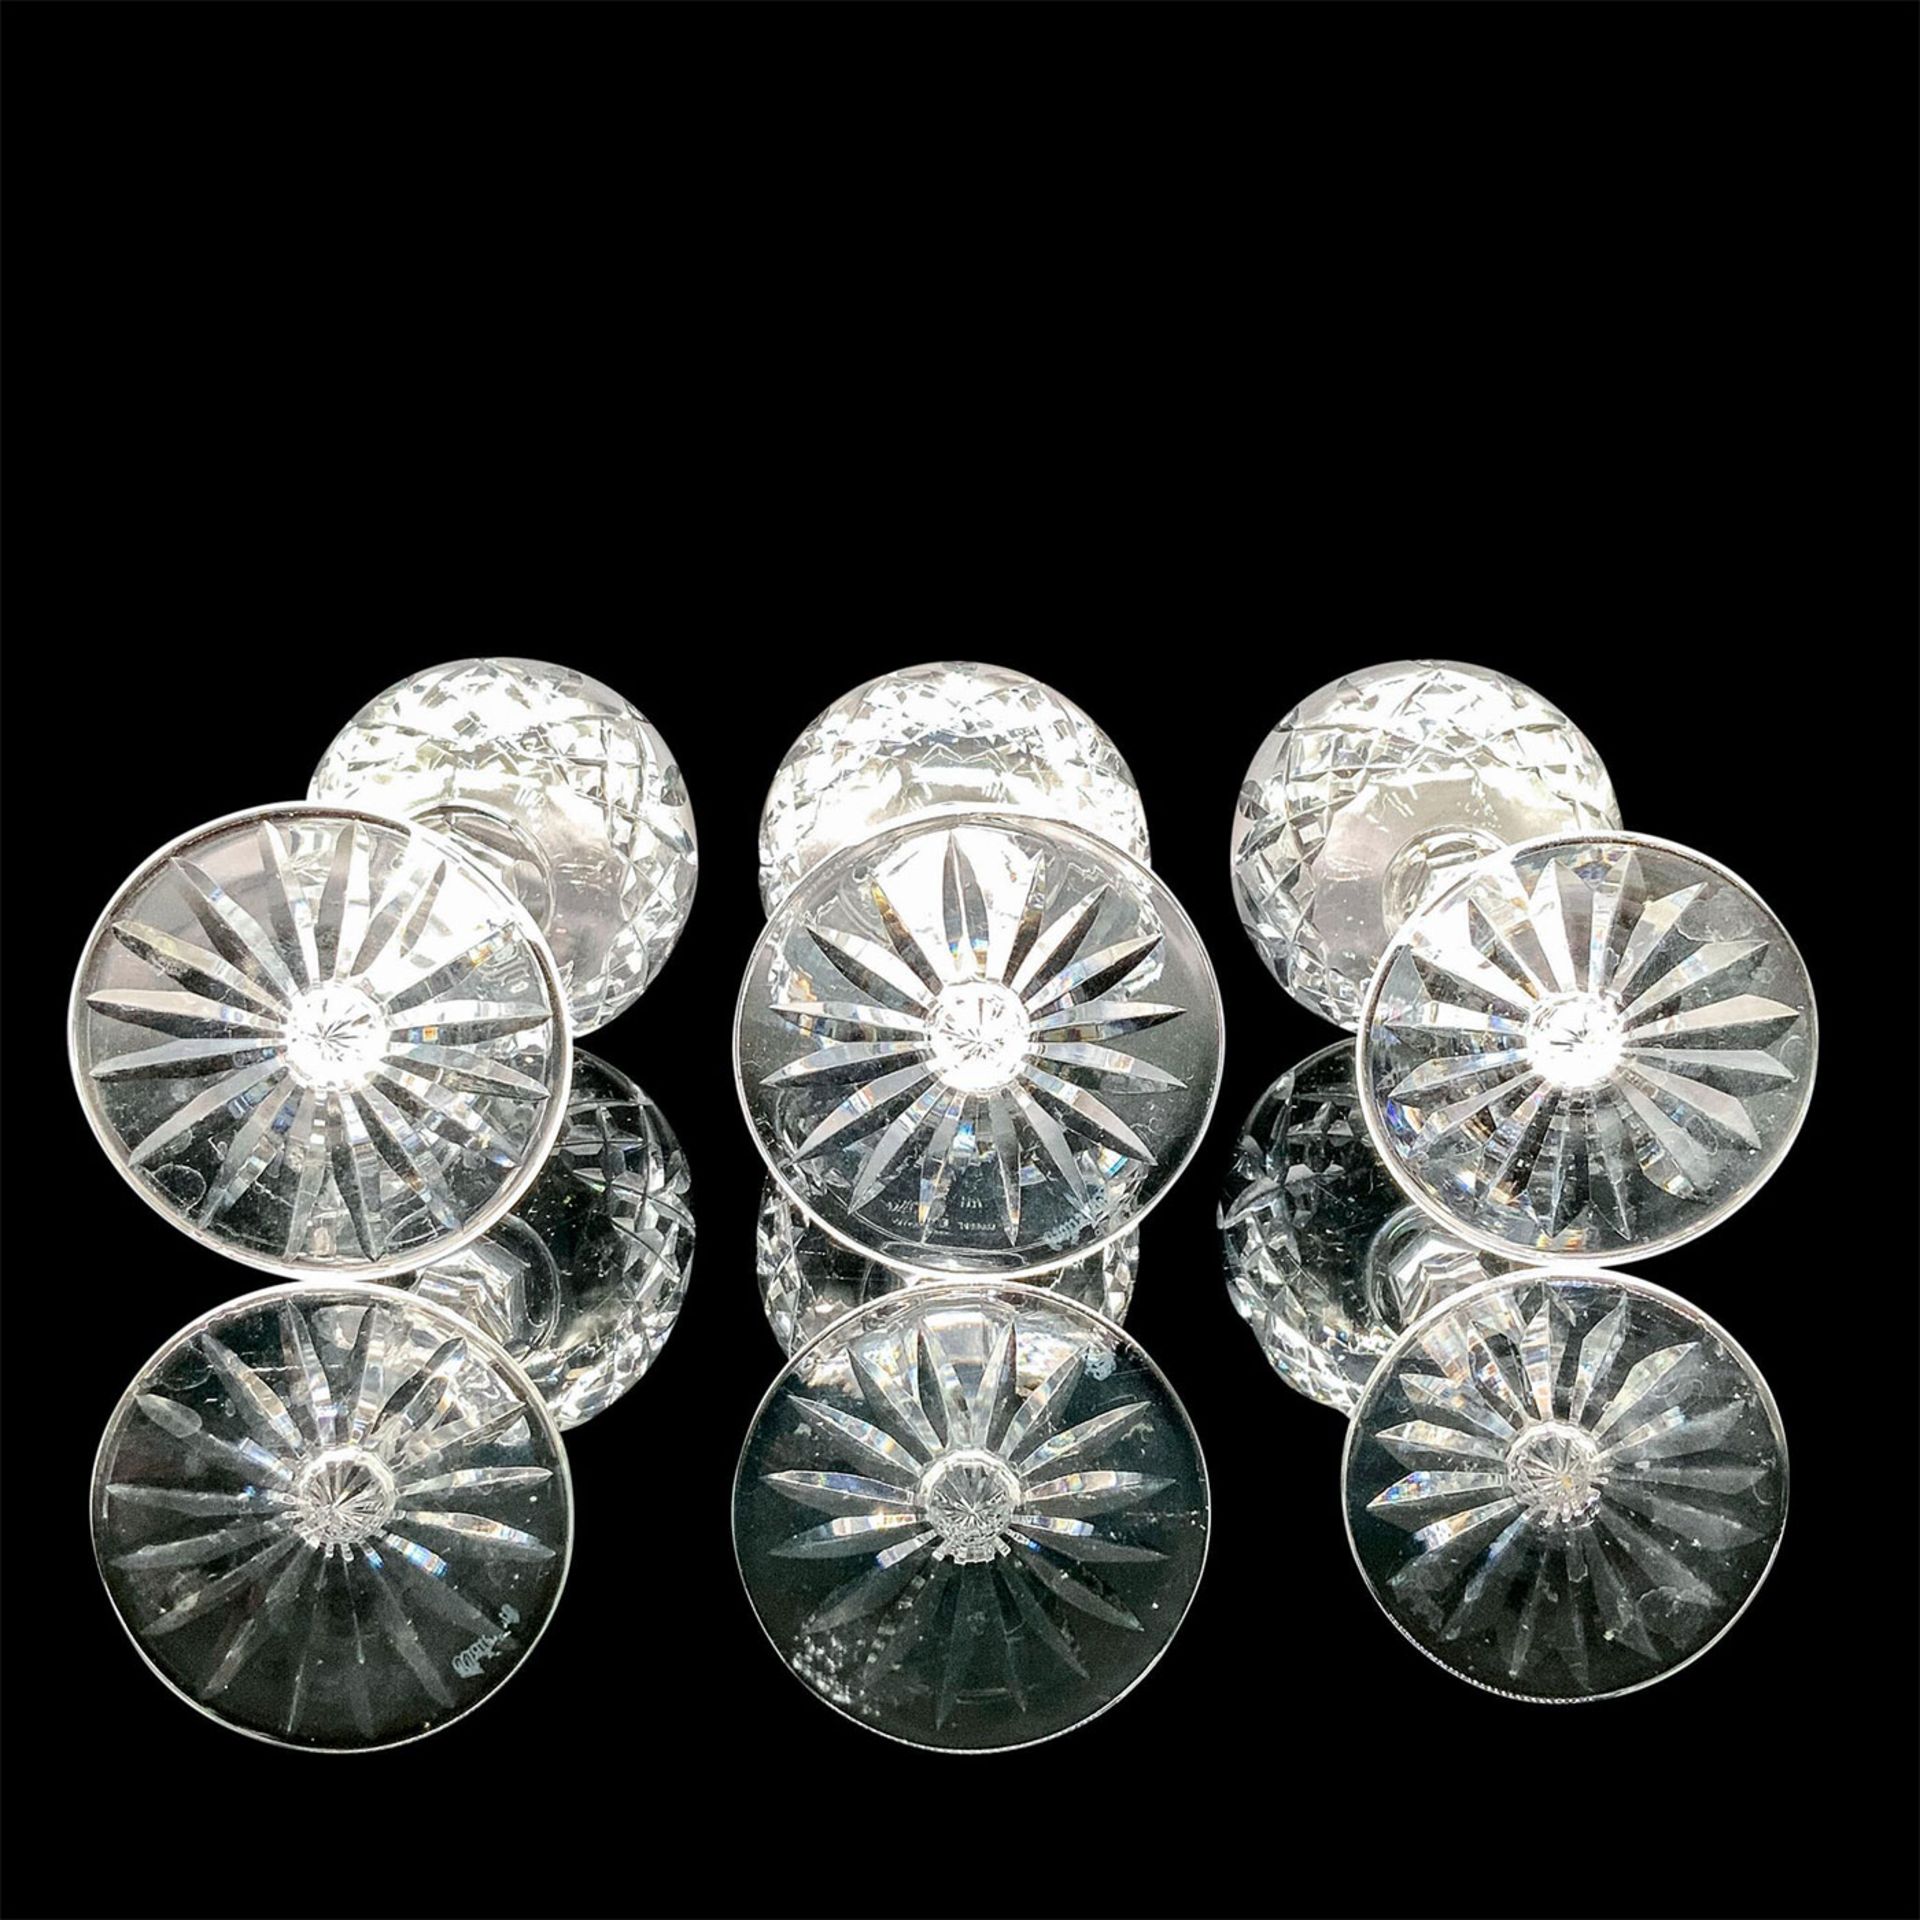 9pc Waterford Lismore Crystal Wine Glasses - Image 4 of 4